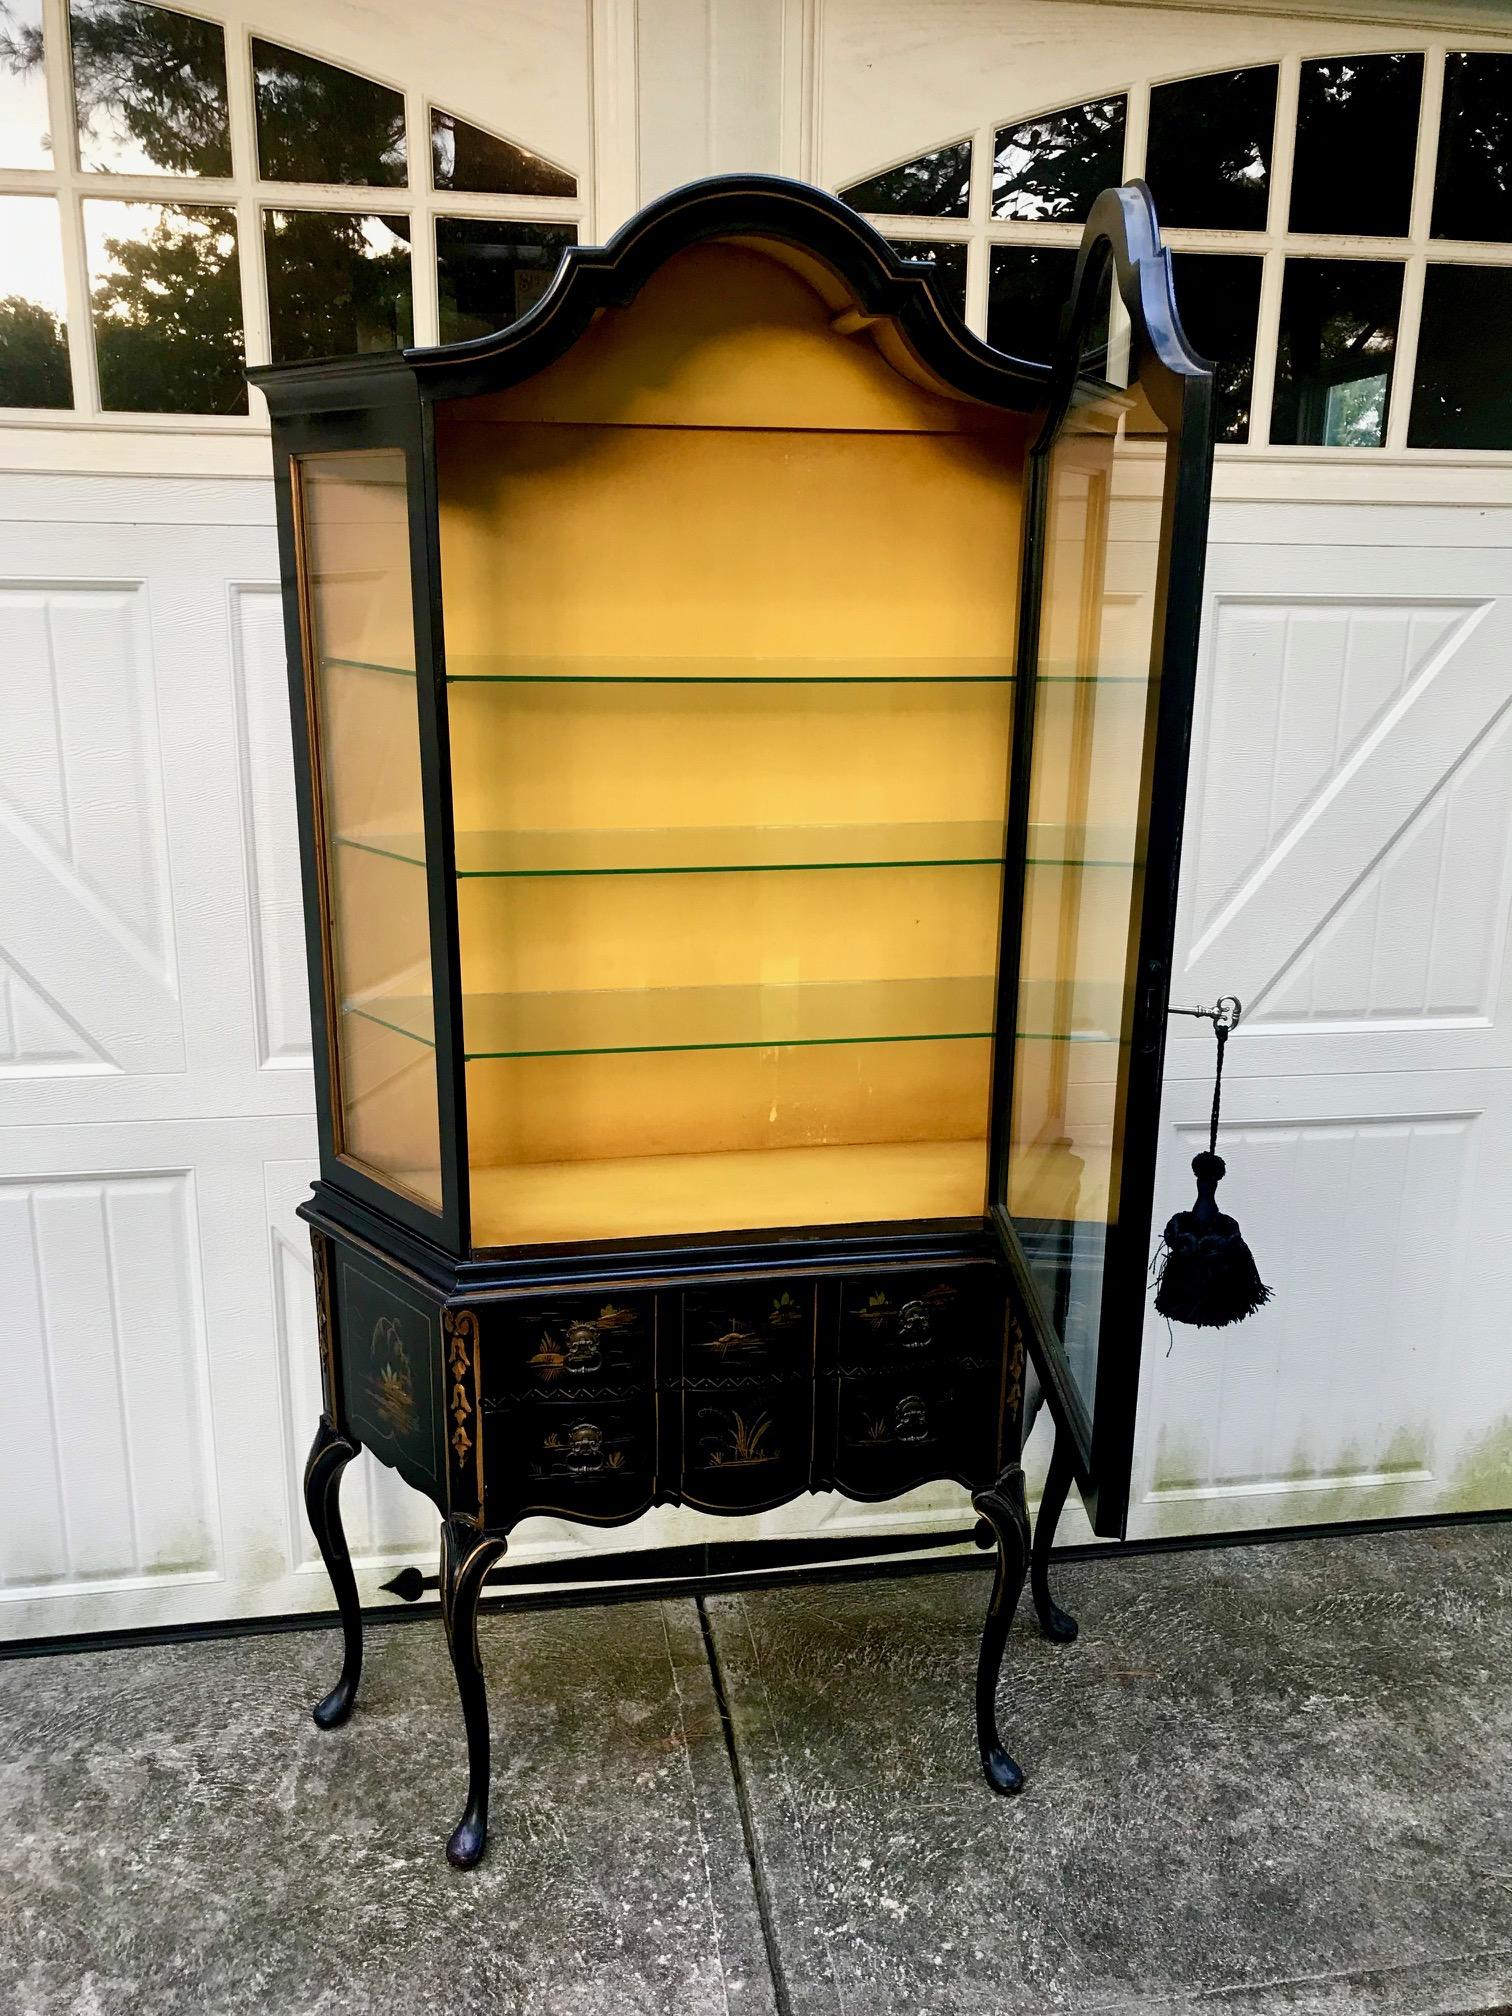 Luxurious elegant display cabinet having Chippendale style silhouette with curved top, 3 sided glass top, two drawers on the bottom and cabriole legs, beautifully decorated with figural gold against black chinoiserie embellishments. 3 interior